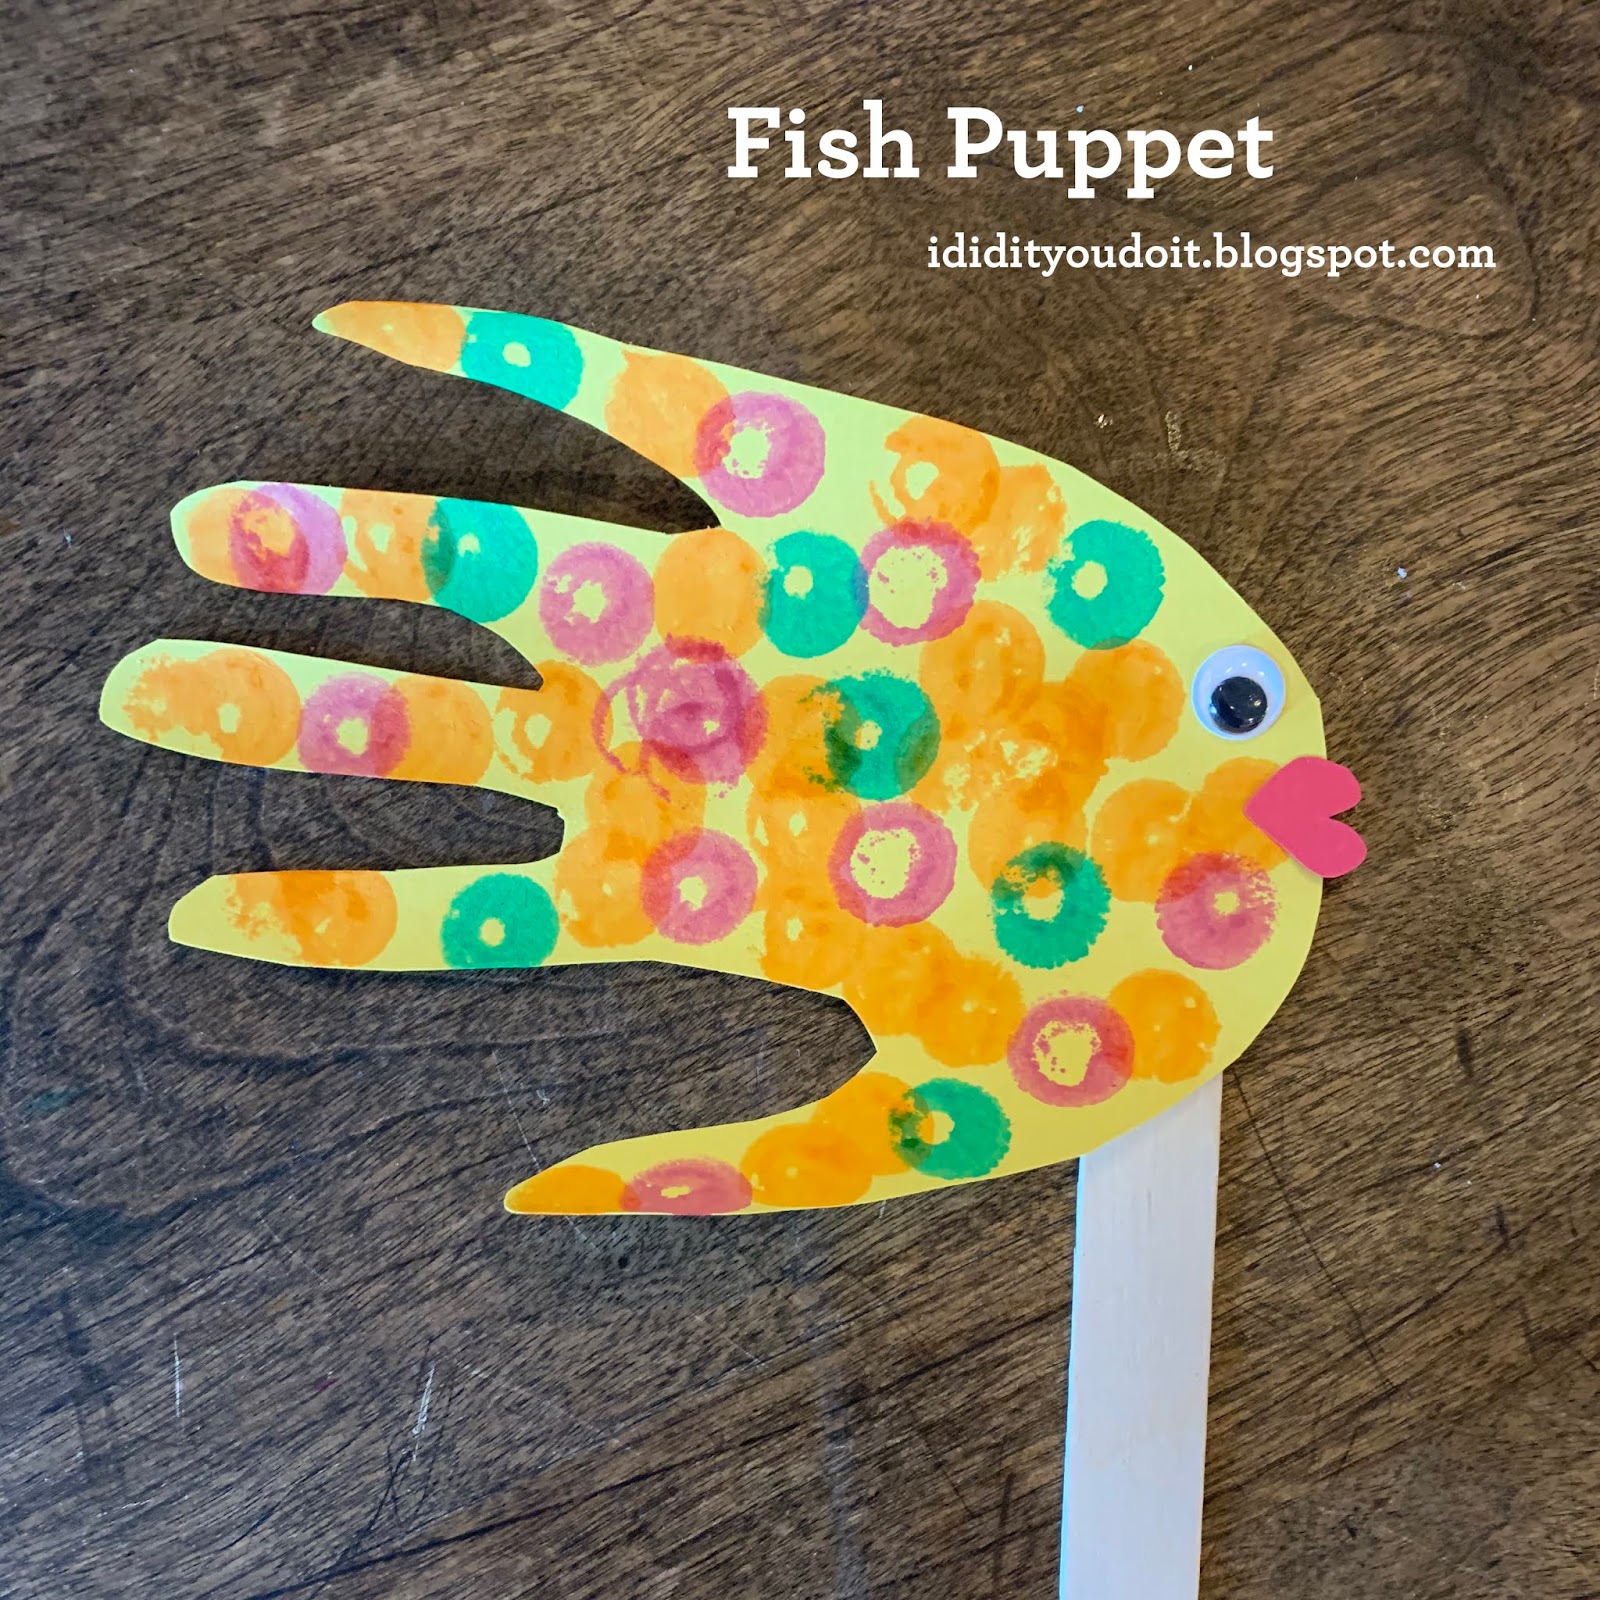 I Did It - You Do It: Fish Puppet